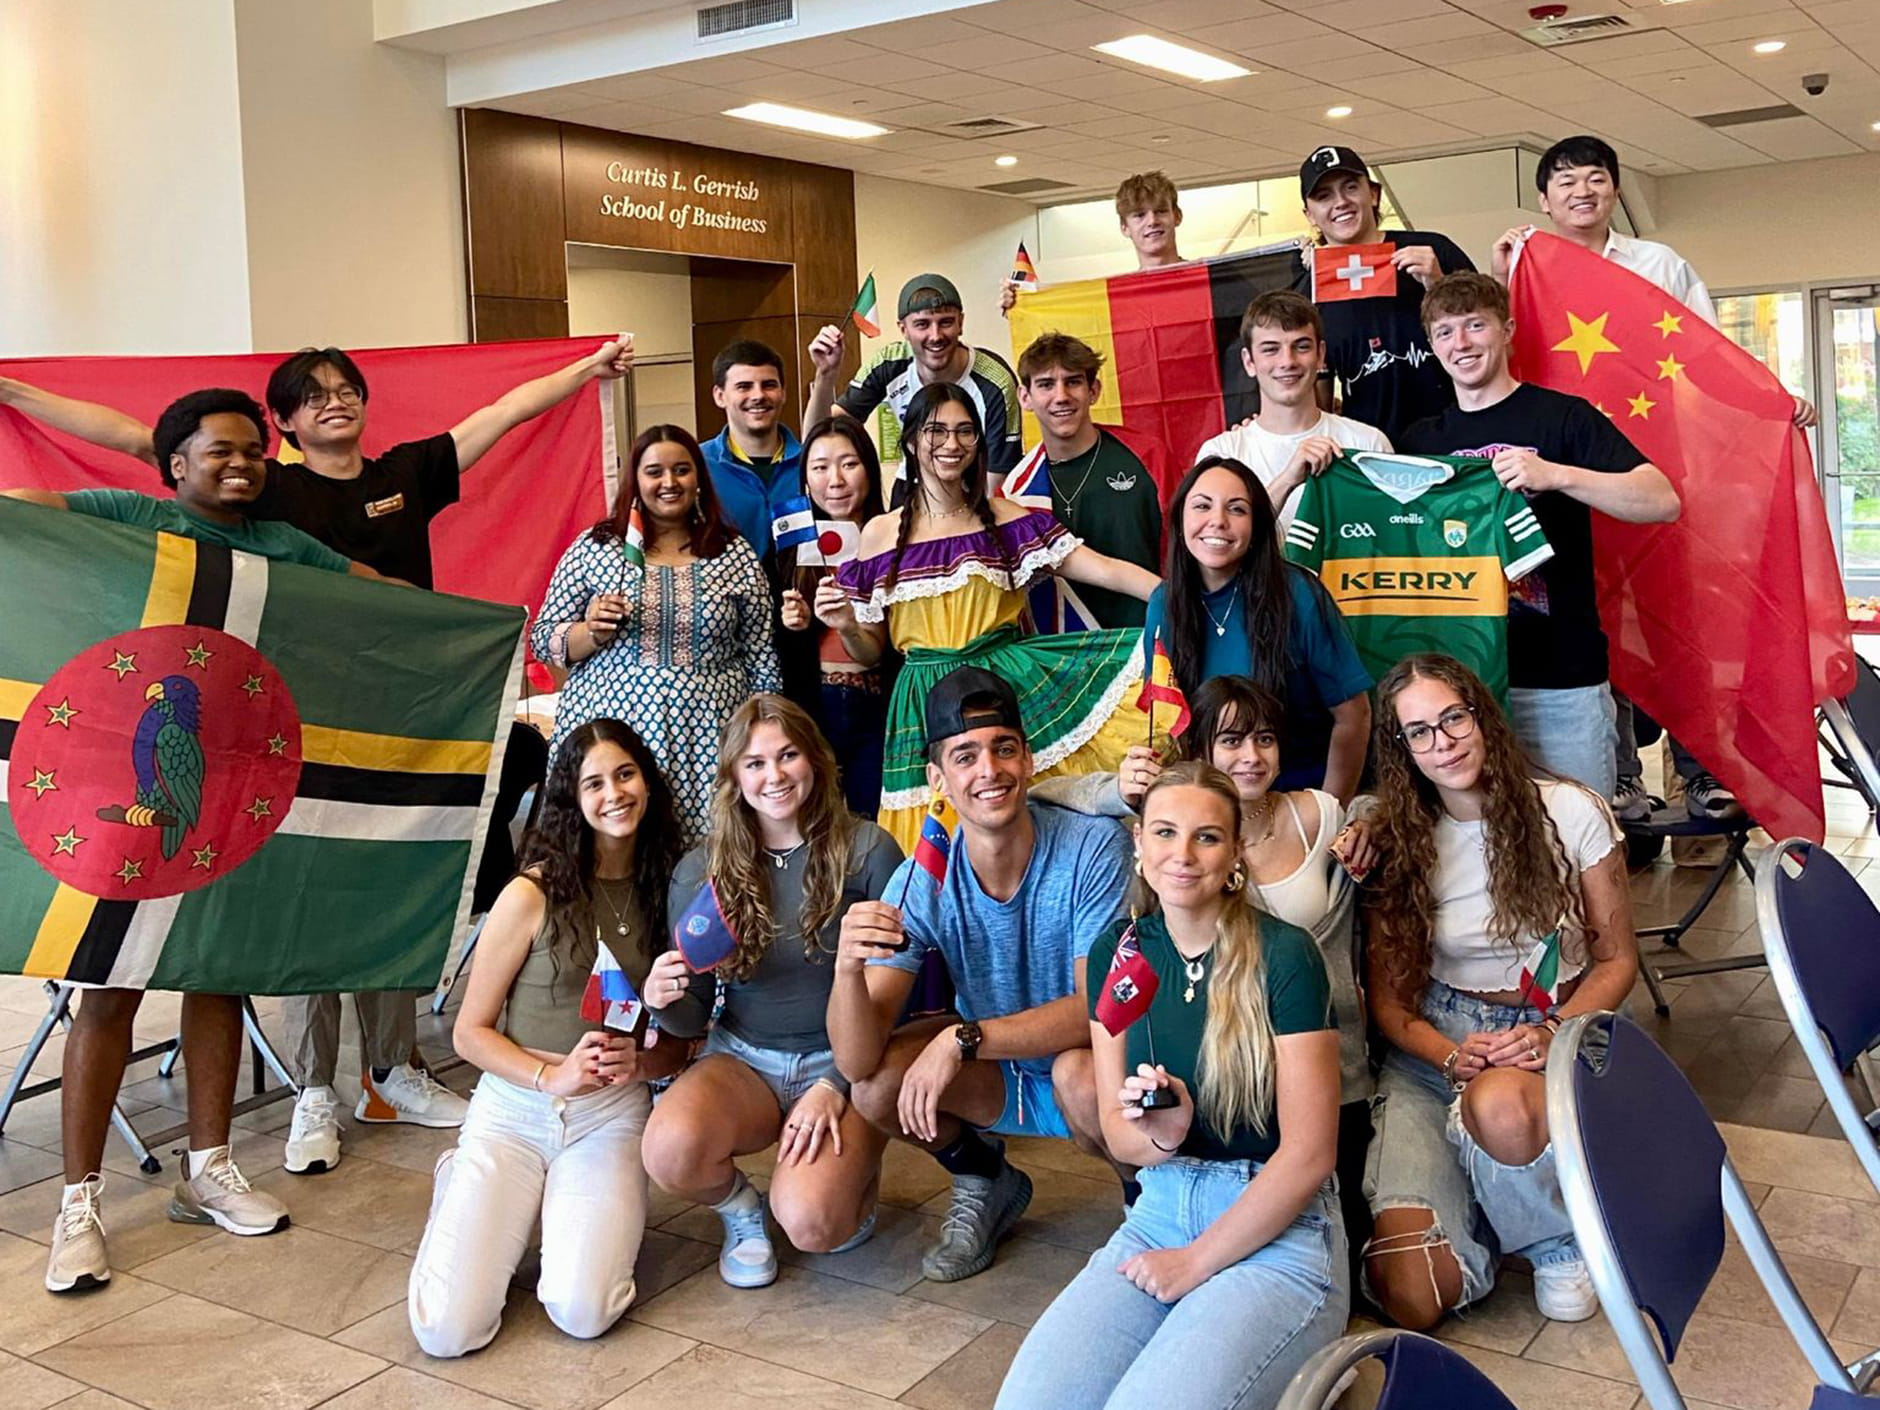 Thanksgiving may be an American holiday, but international students at Endicott College have plans of their own—some involving turkey and stuffing, and some involving Mexico.